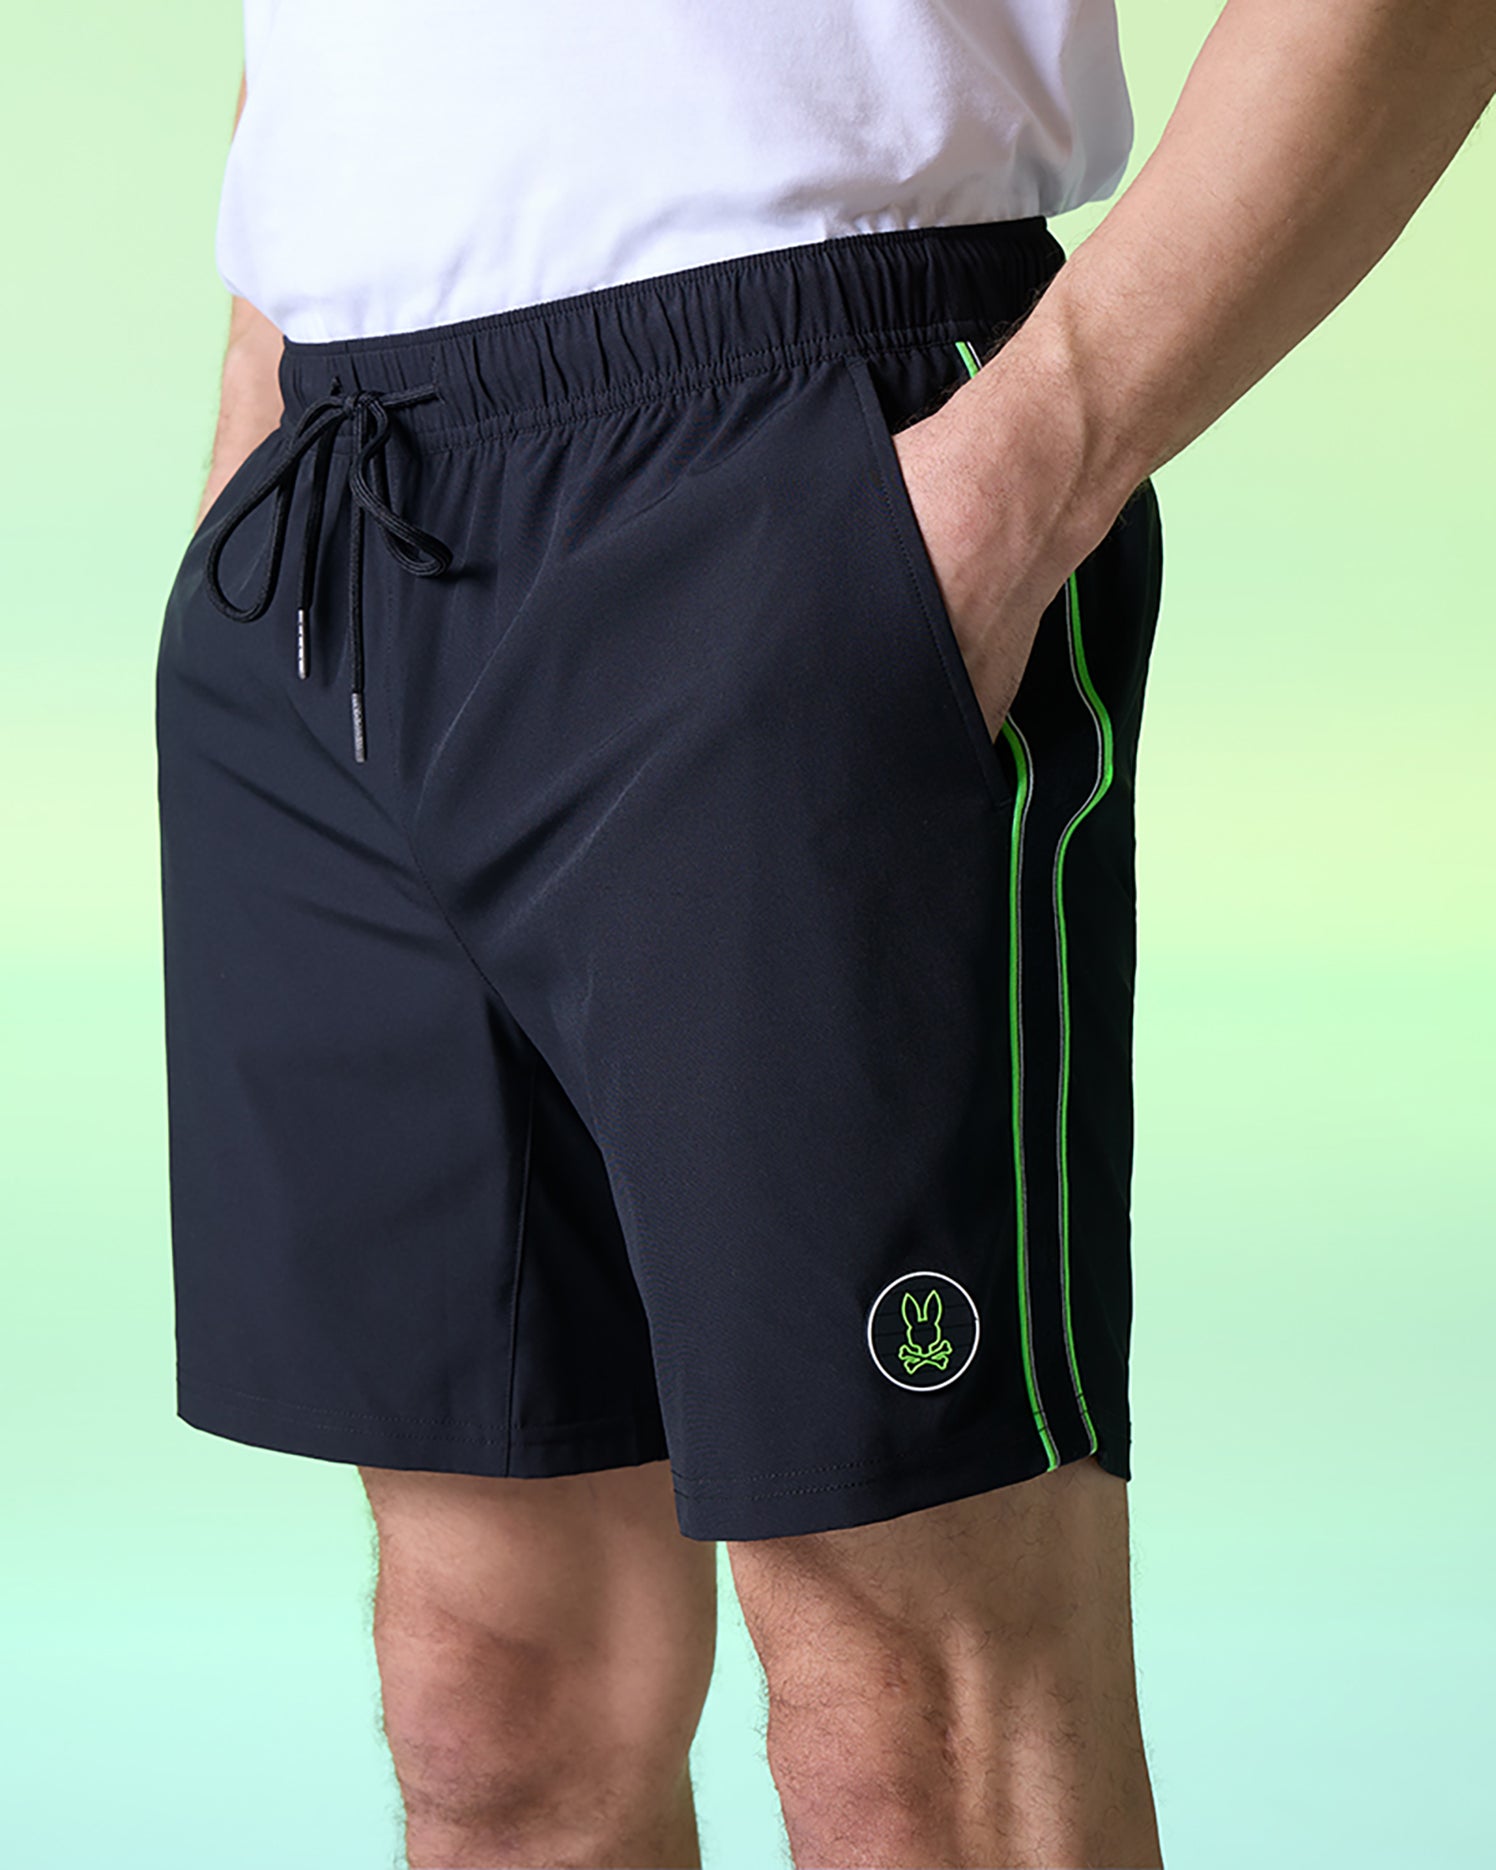 A person is standing wearing black Psycho Bunny MENS SONTERRA STRIPE SPORT SHORT - B6R464C200 made from breathable fabric, featuring green piping along the sides and a small green bunny logo on the left thigh. The background is a gradient of light green and light blue. The person is also wearing a plain white shirt.